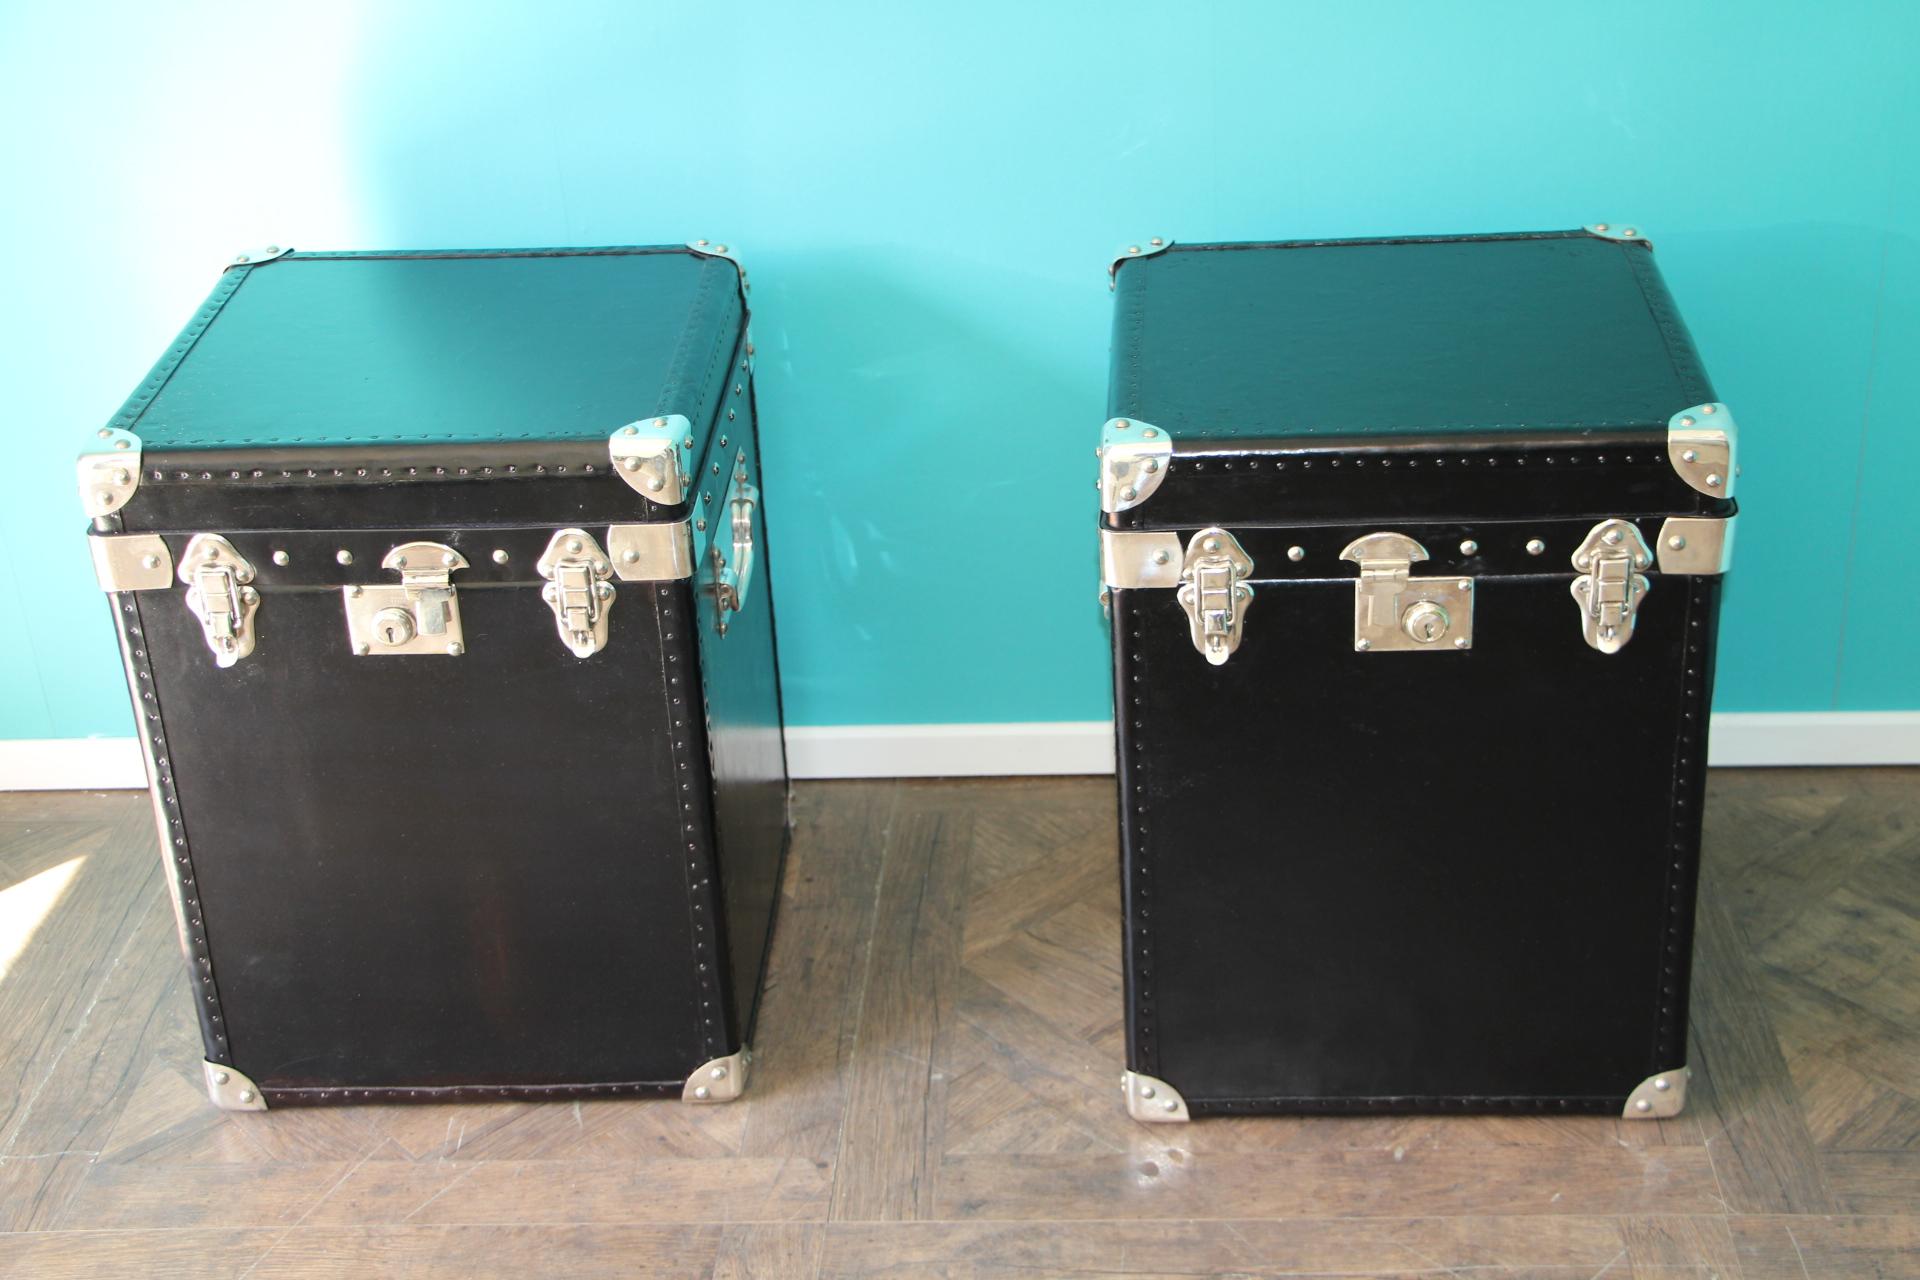 Beautiful pair of steamer trunks in solid wood covered with black leather. Polished aluminum corners and polished steel locks and side handles.
They could be used as bedside tables, side tables, blanket boxes or coffee tables. And they also can be